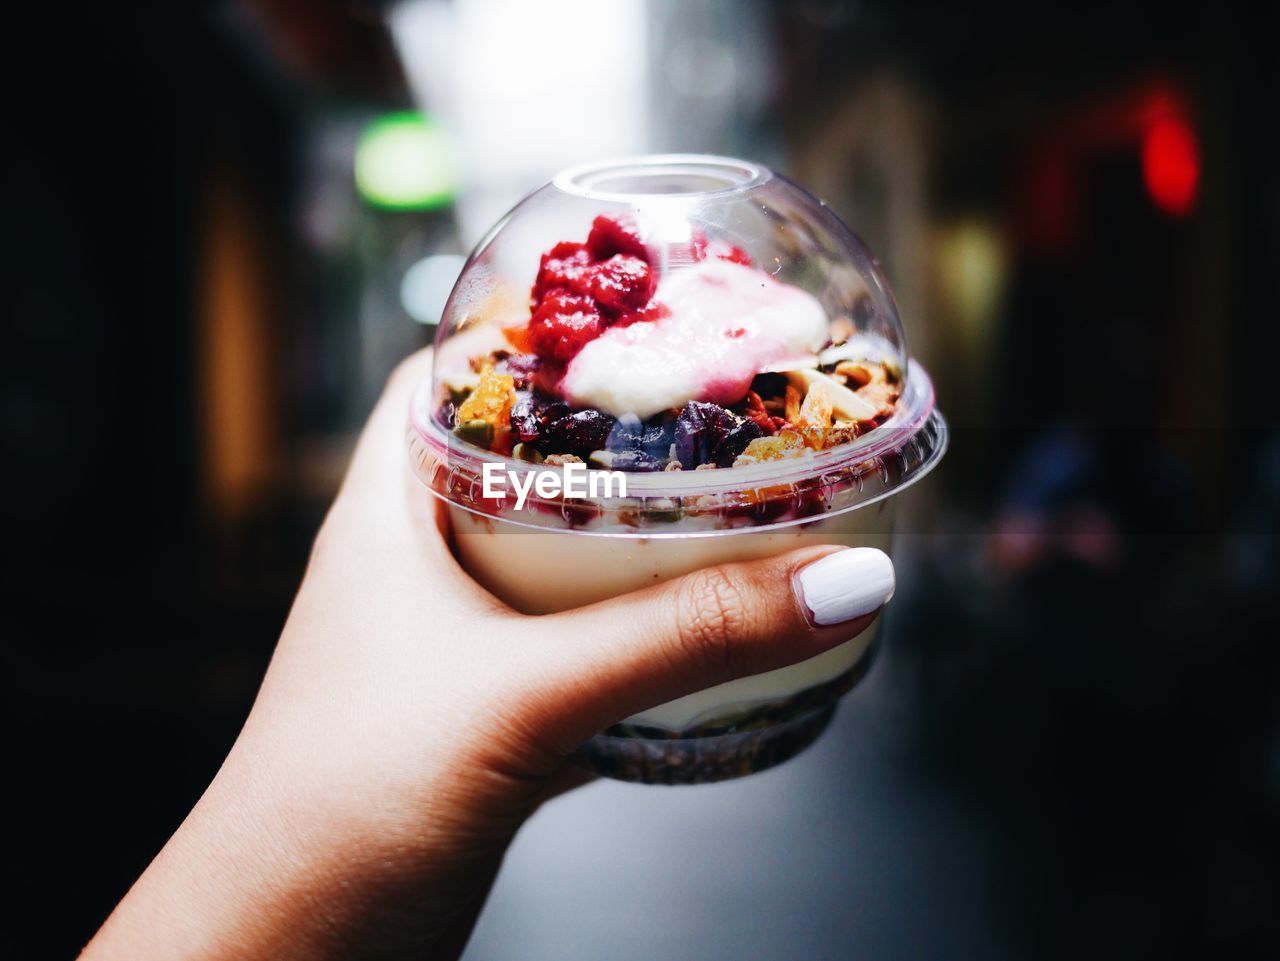 MIDSECTION OF PERSON HOLDING ICE CREAM IN GLASS